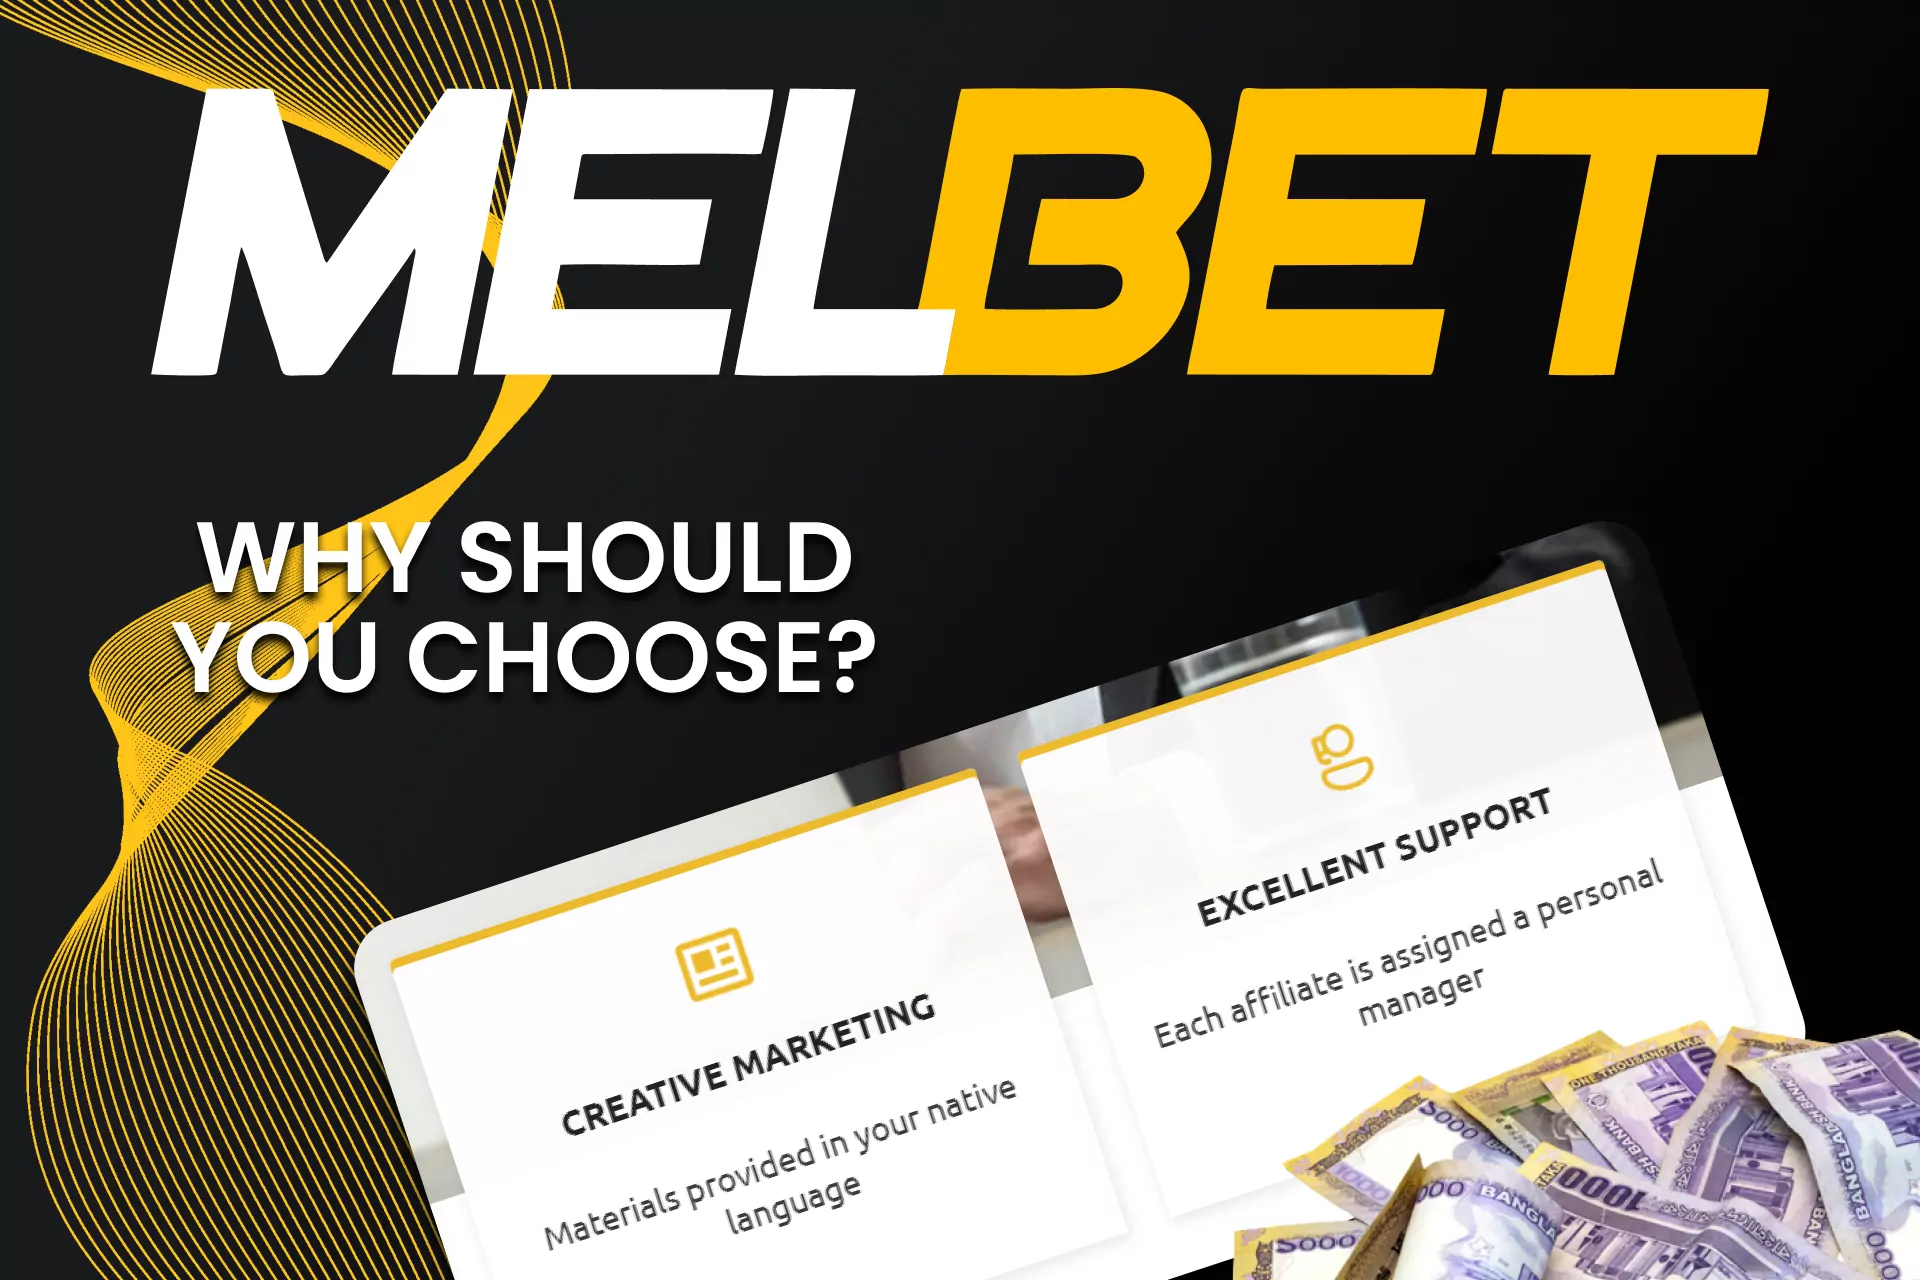 You will receive favorable conditions when choosing a bonus program from Melbet.